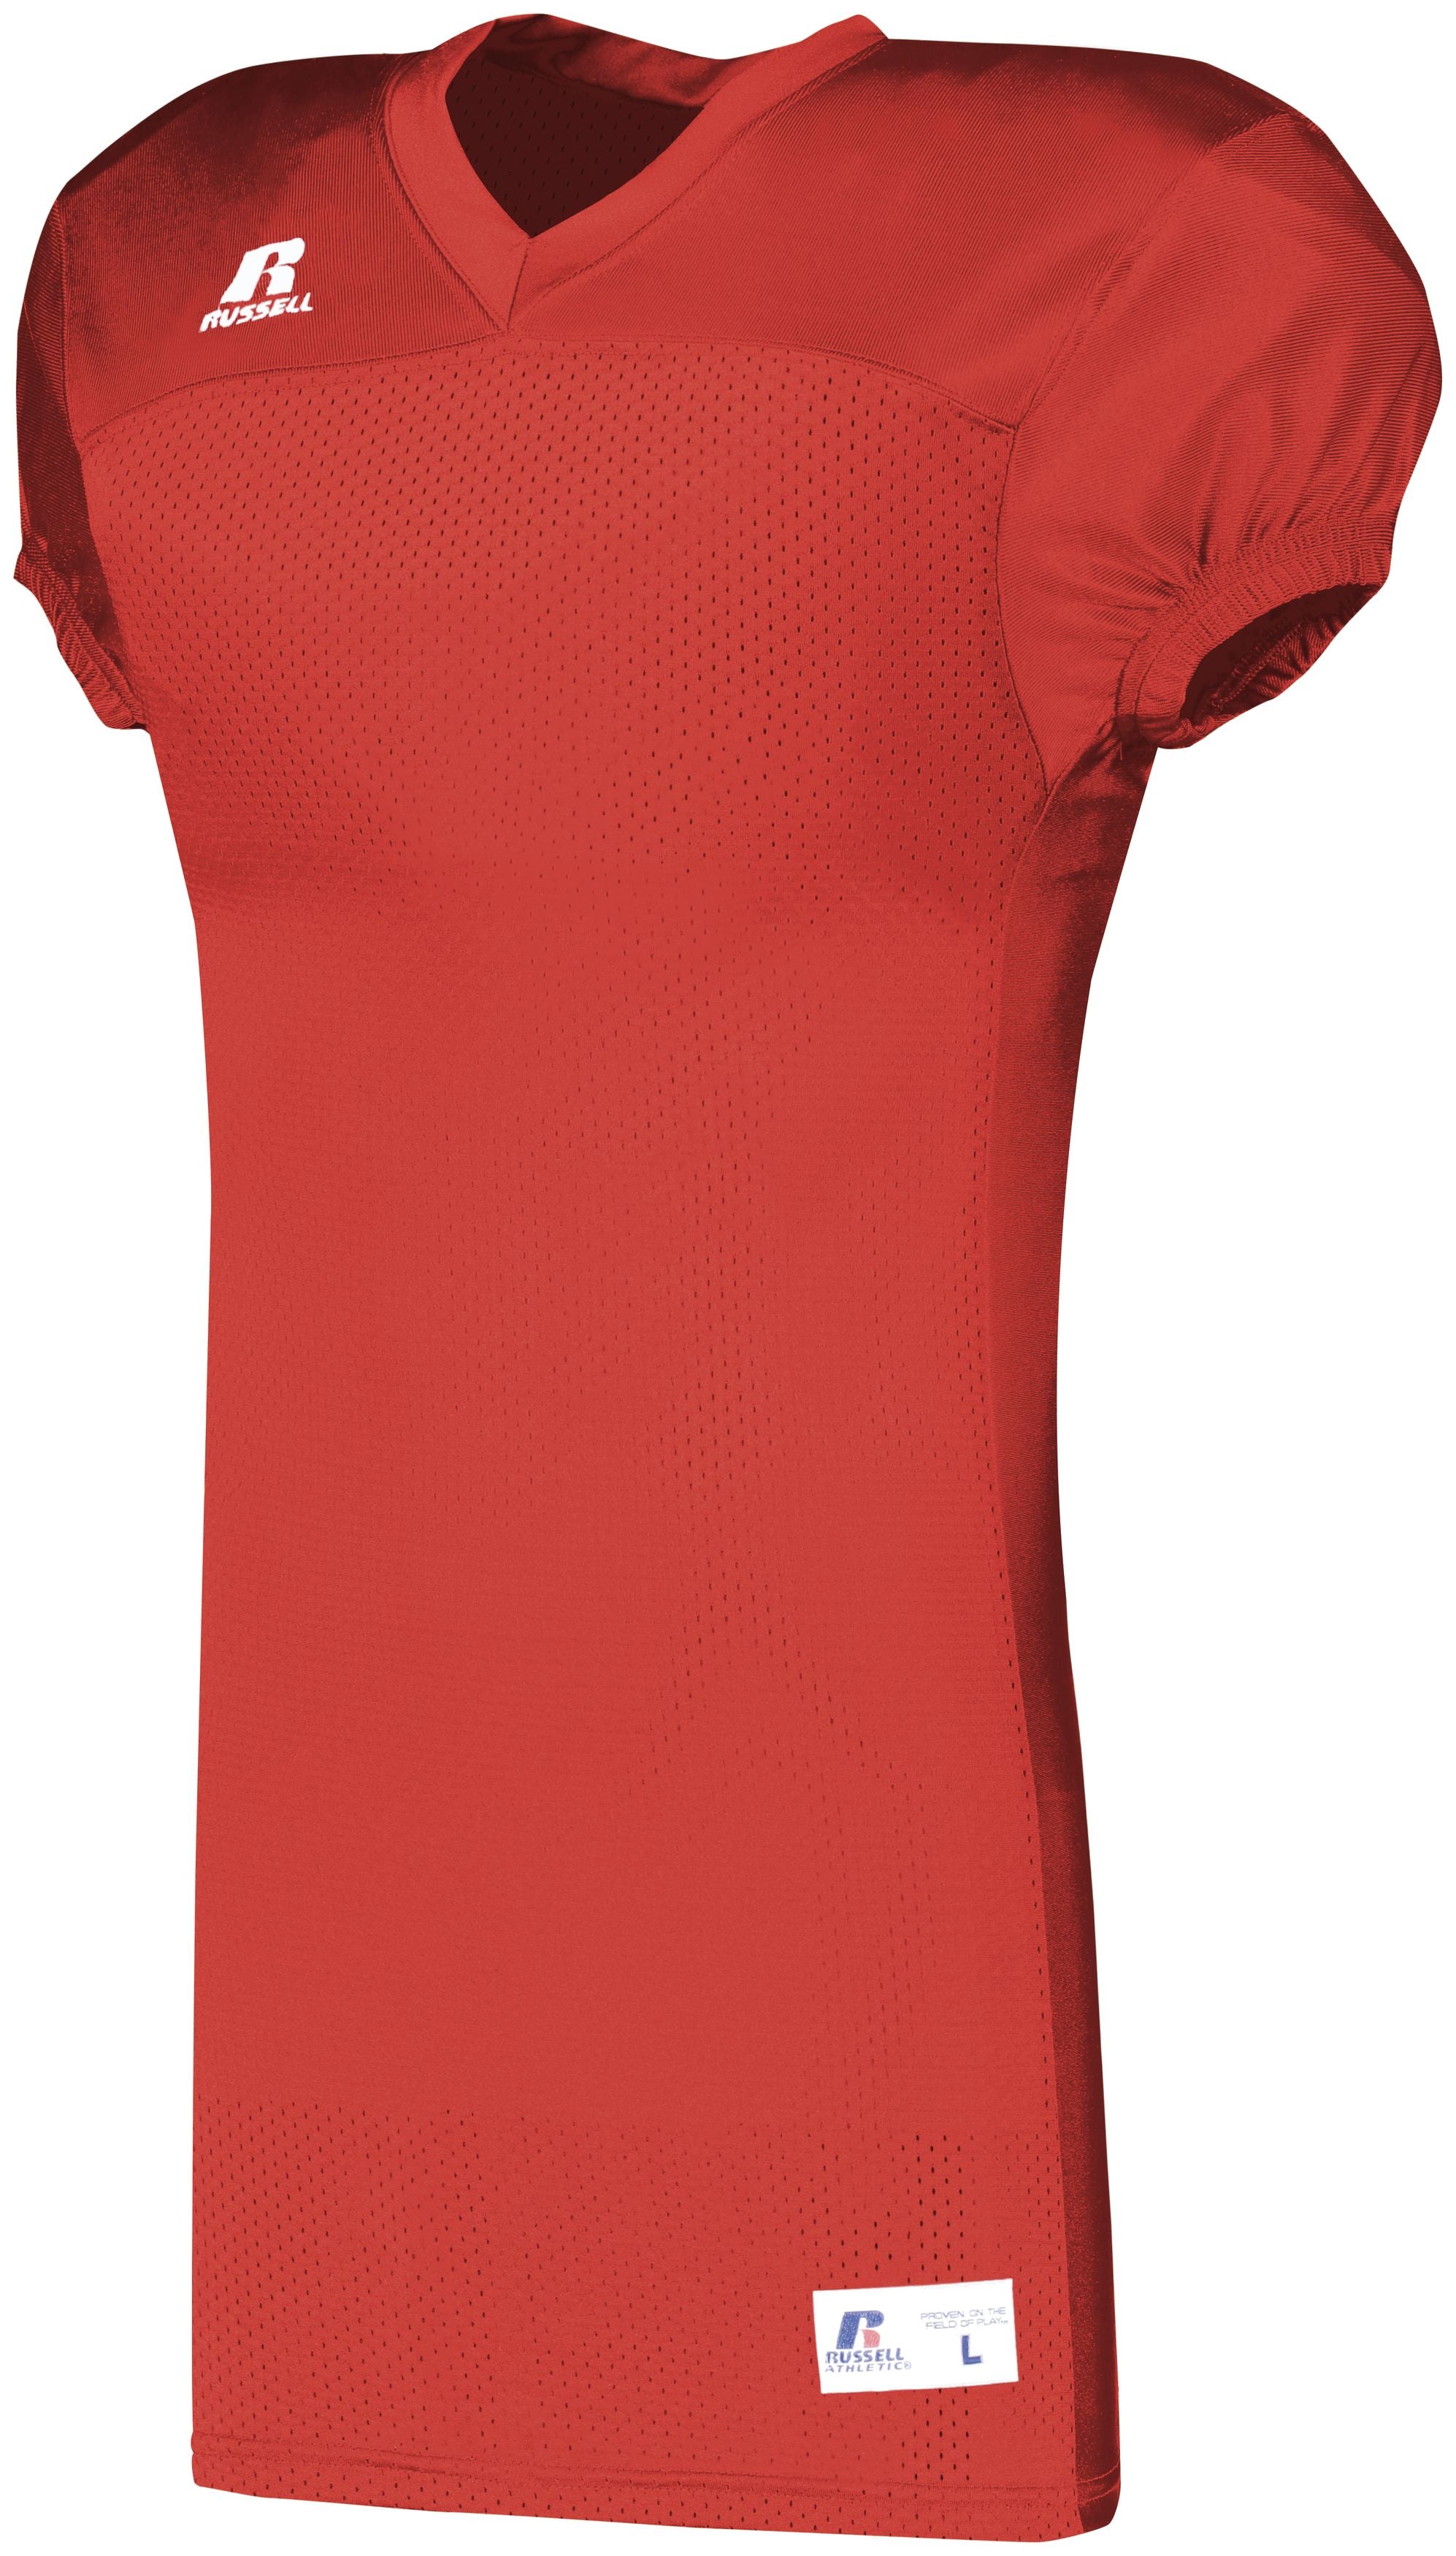 Russell Athletic Solid Jersey With Side Inserts in True Red  -Part of the Adult, Adult-Jersey, Football, Russell-Athletic-Products, Shirts, All-Sports, All-Sports-1 product lines at KanaleyCreations.com